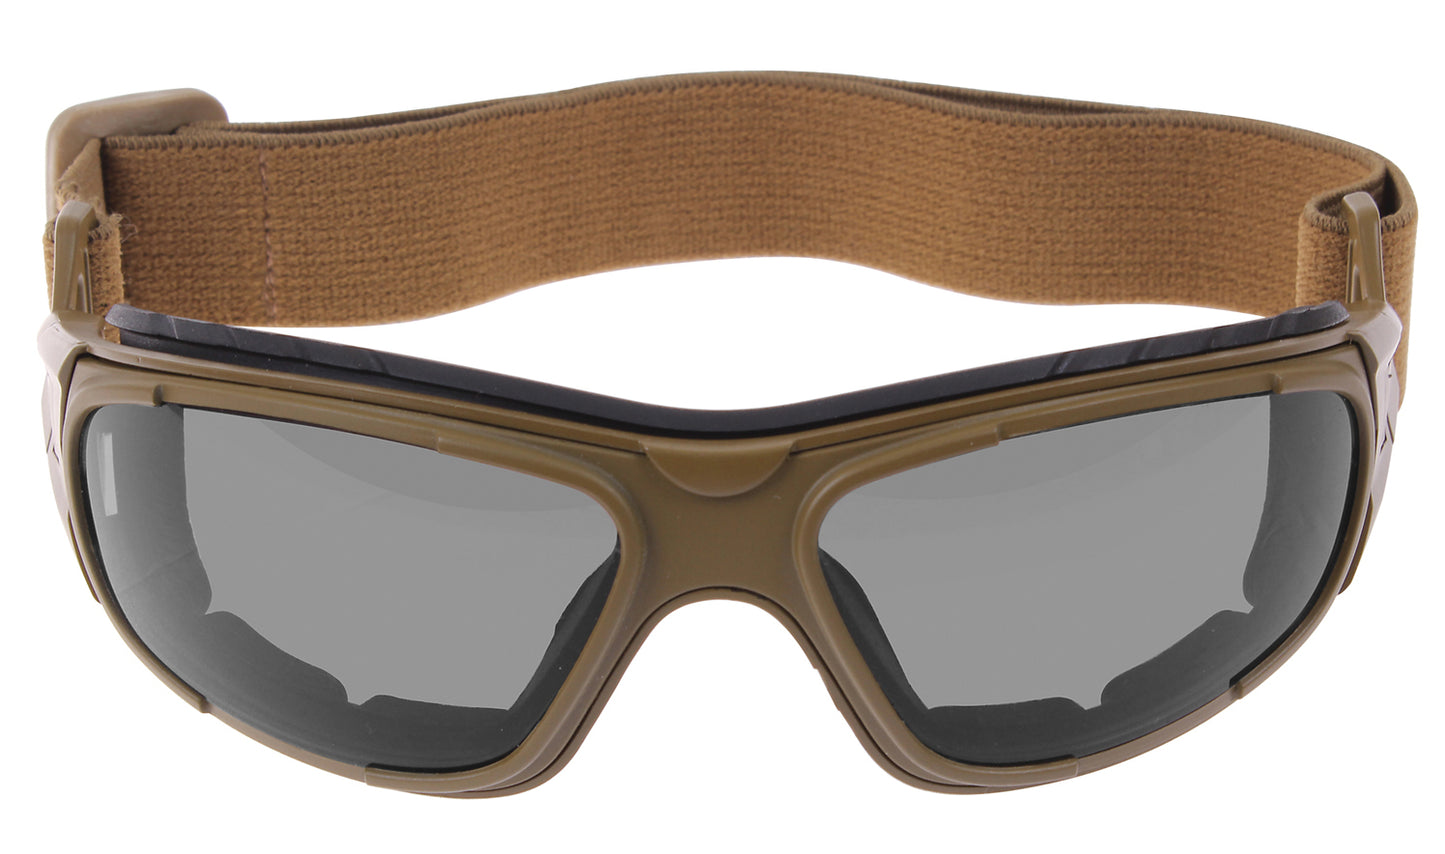 Coyote Brown Interchangeable Sunglasses to Goggles Tactical Optical System